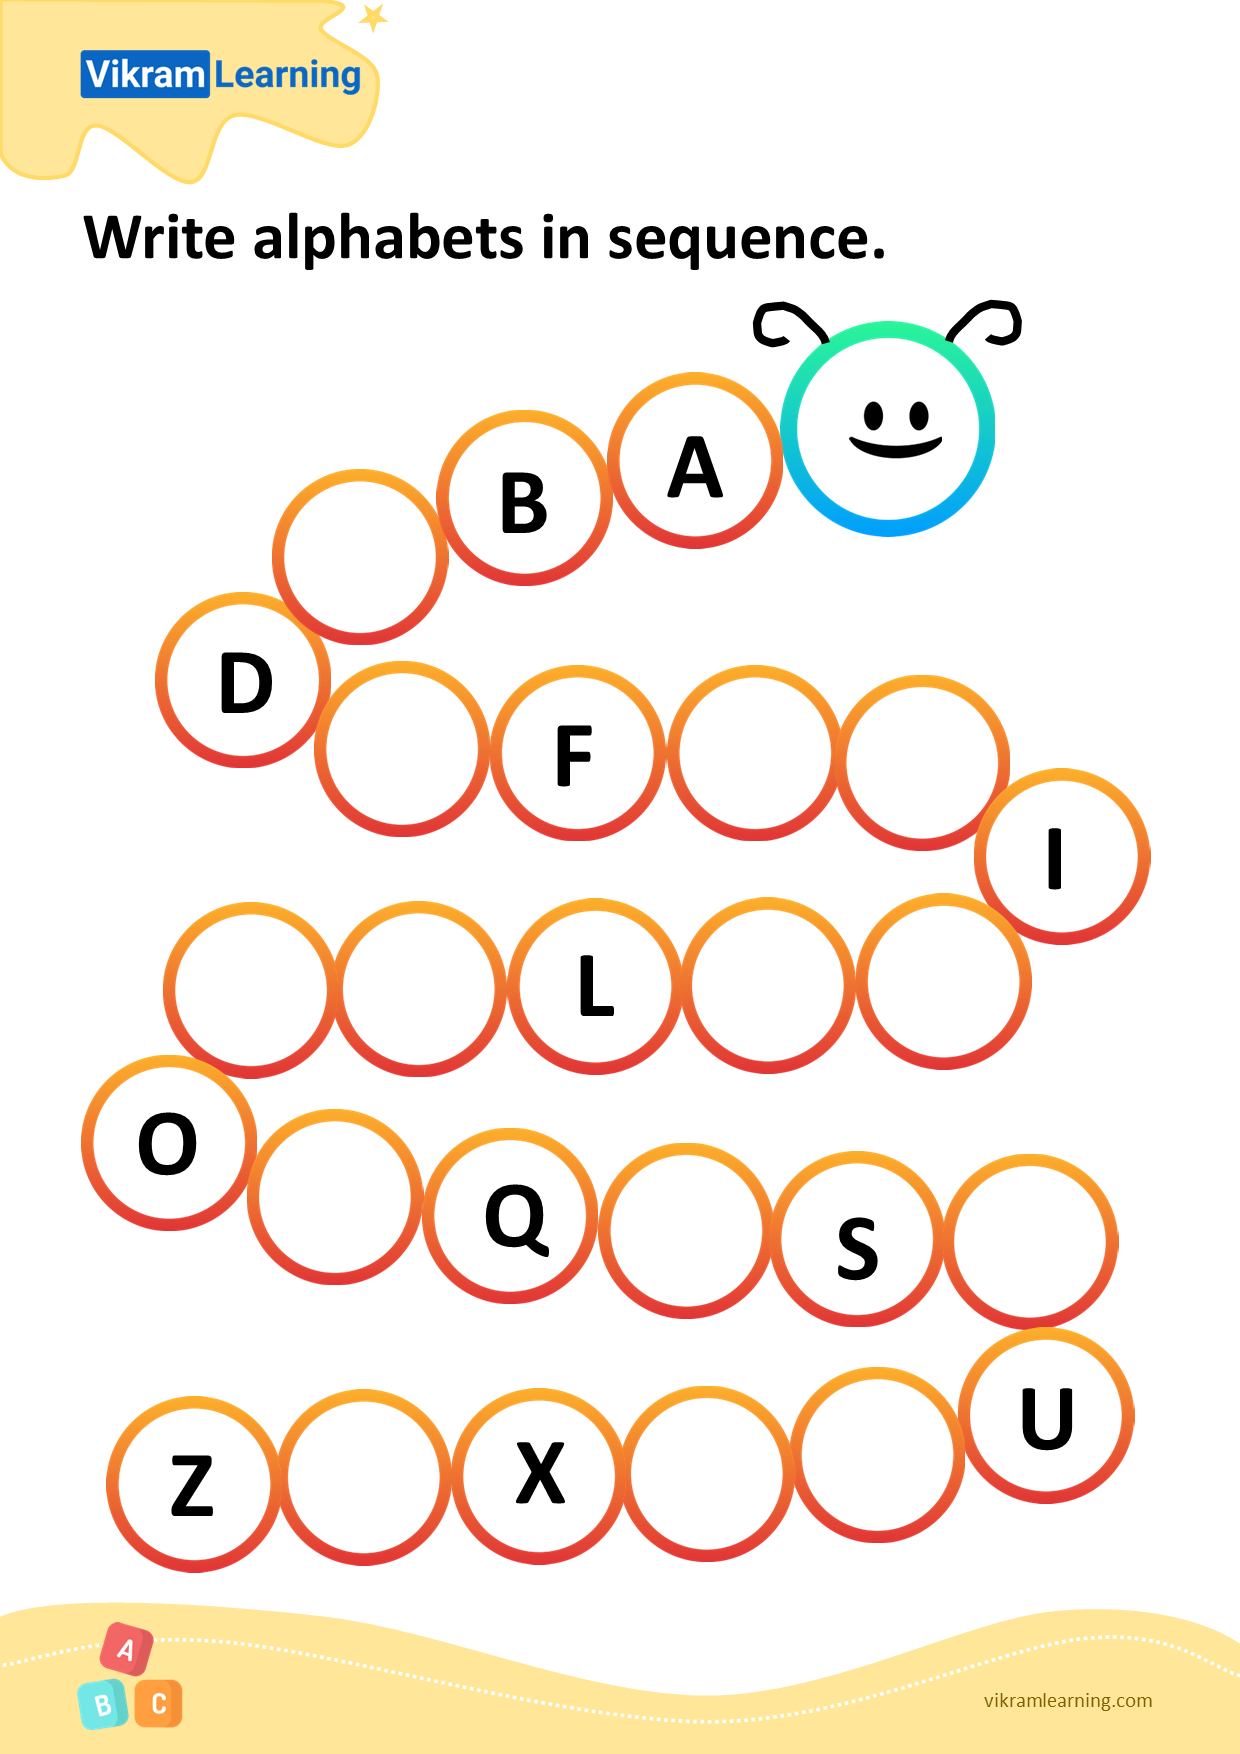 Download write alphabets in sequence - pattern 1 worksheets